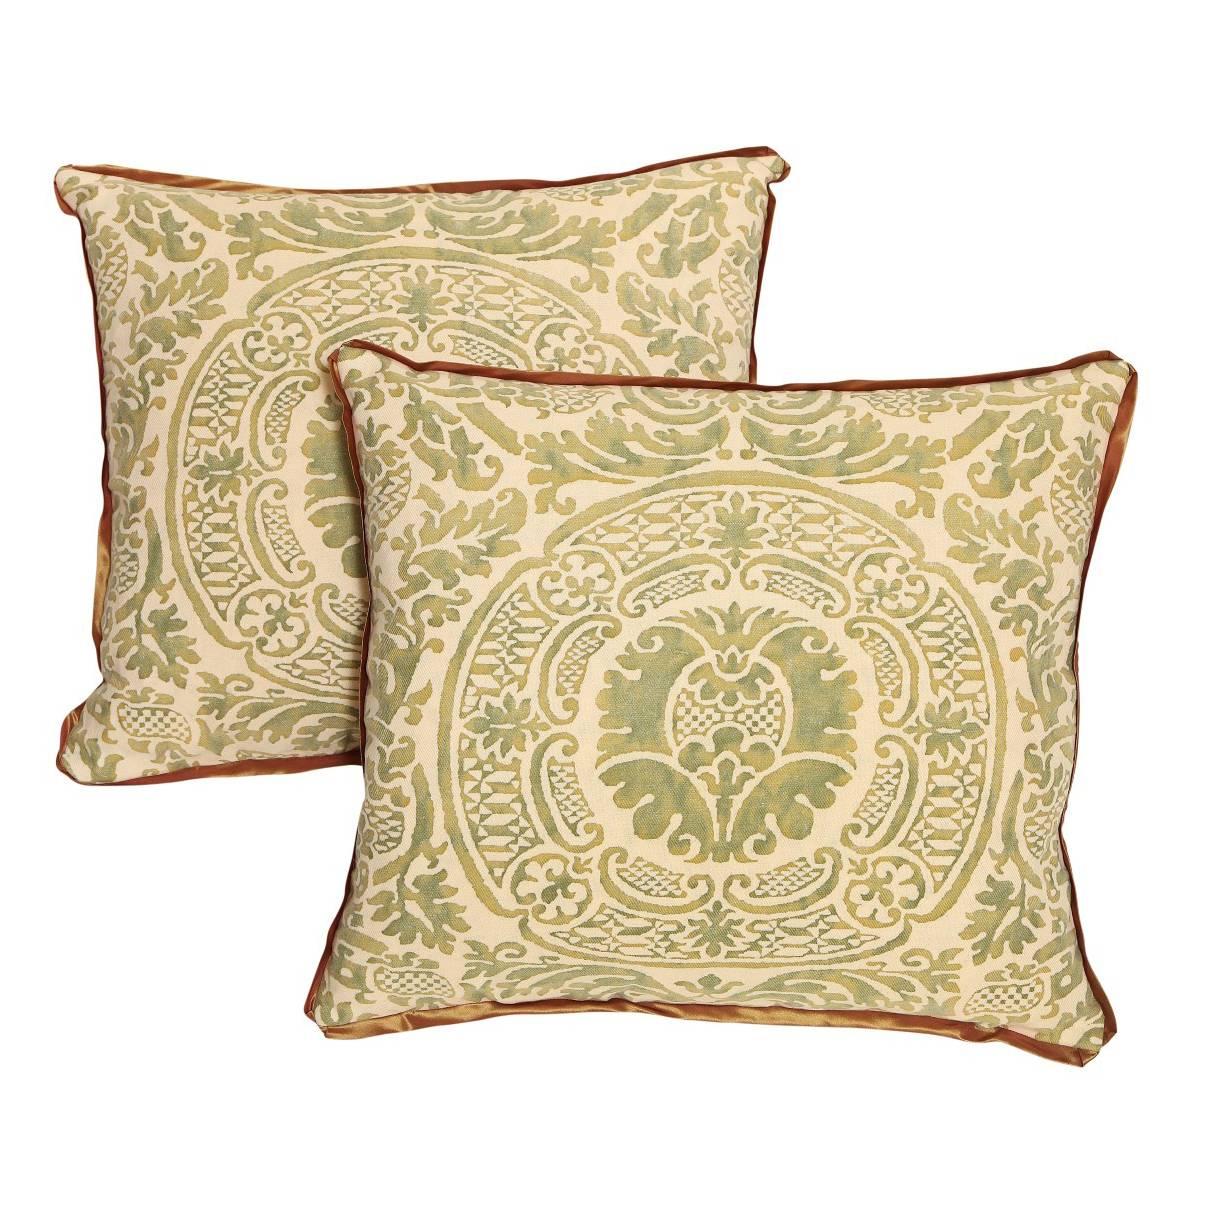 A Pair of Fortuny Fabric Cushions in the Orsini Pattern